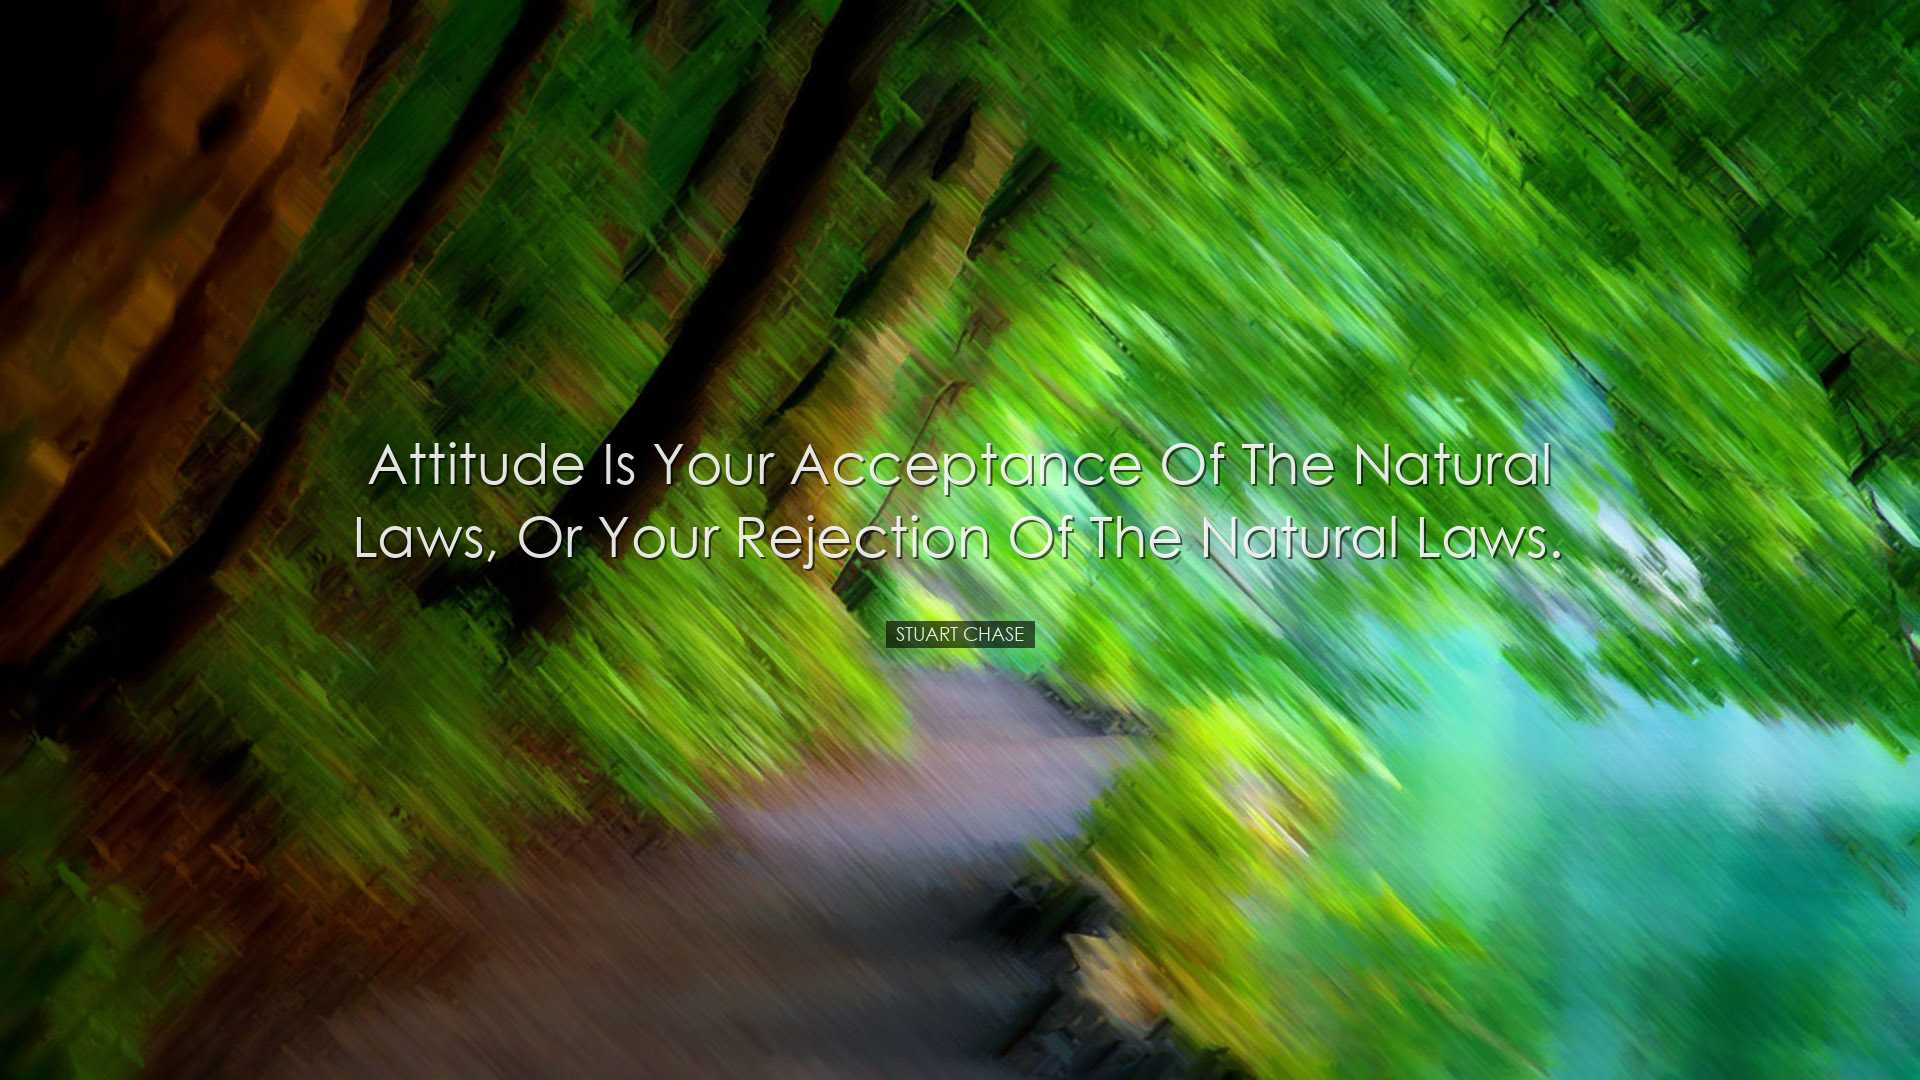 Attitude is your acceptance of the natural laws, or your rejection